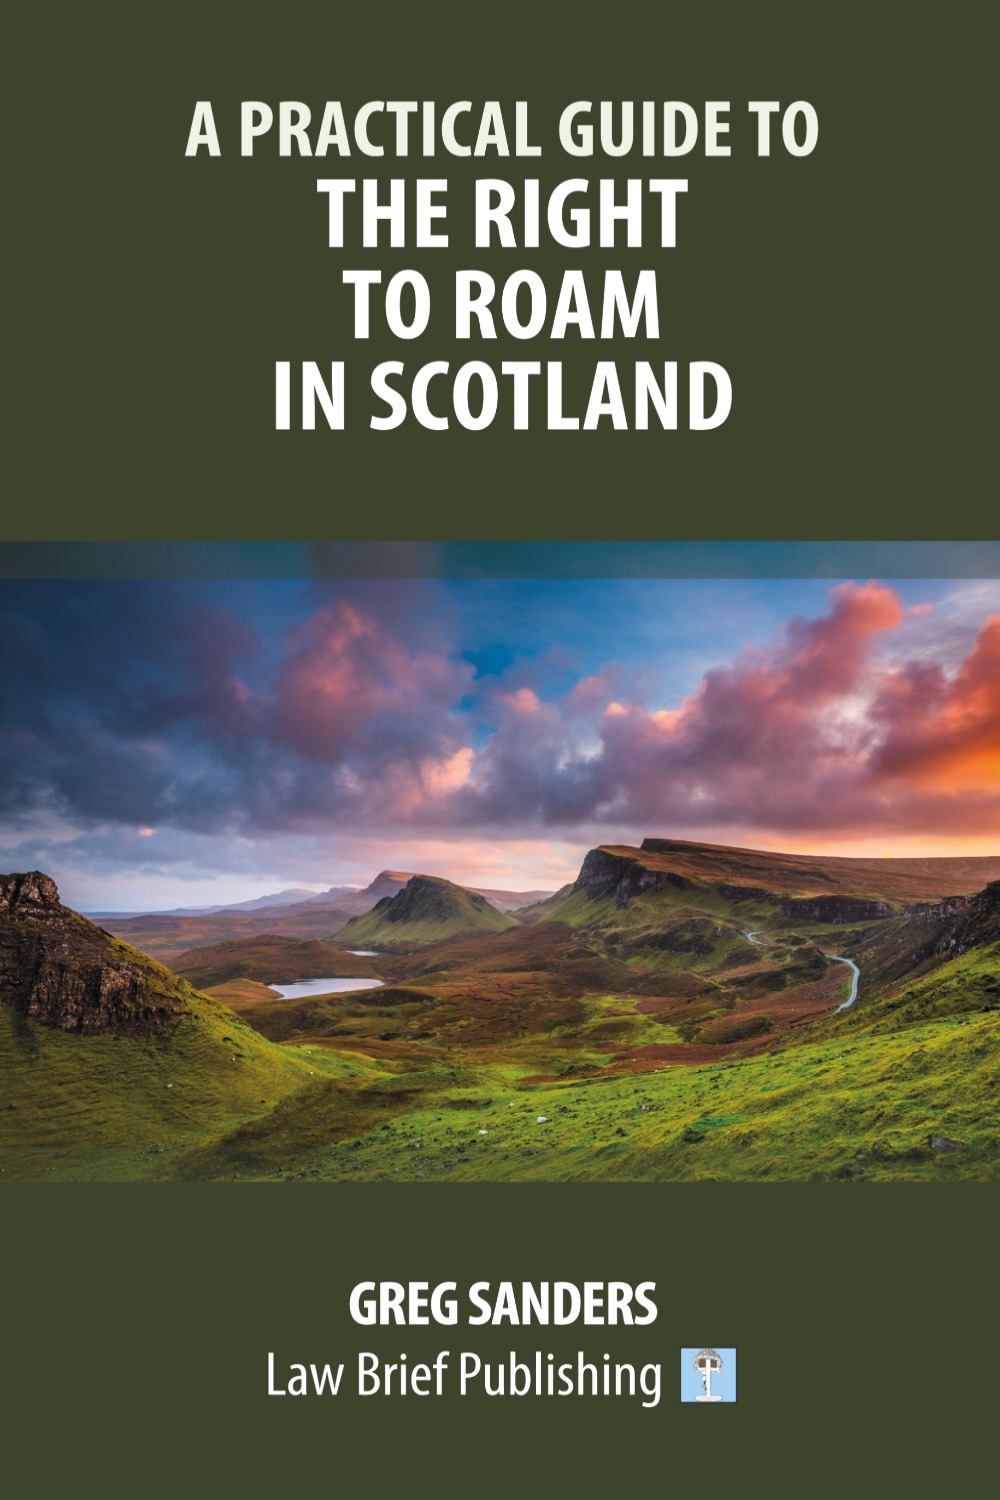 Advocate Greg Sanders pens new book on right to roam in Scotland